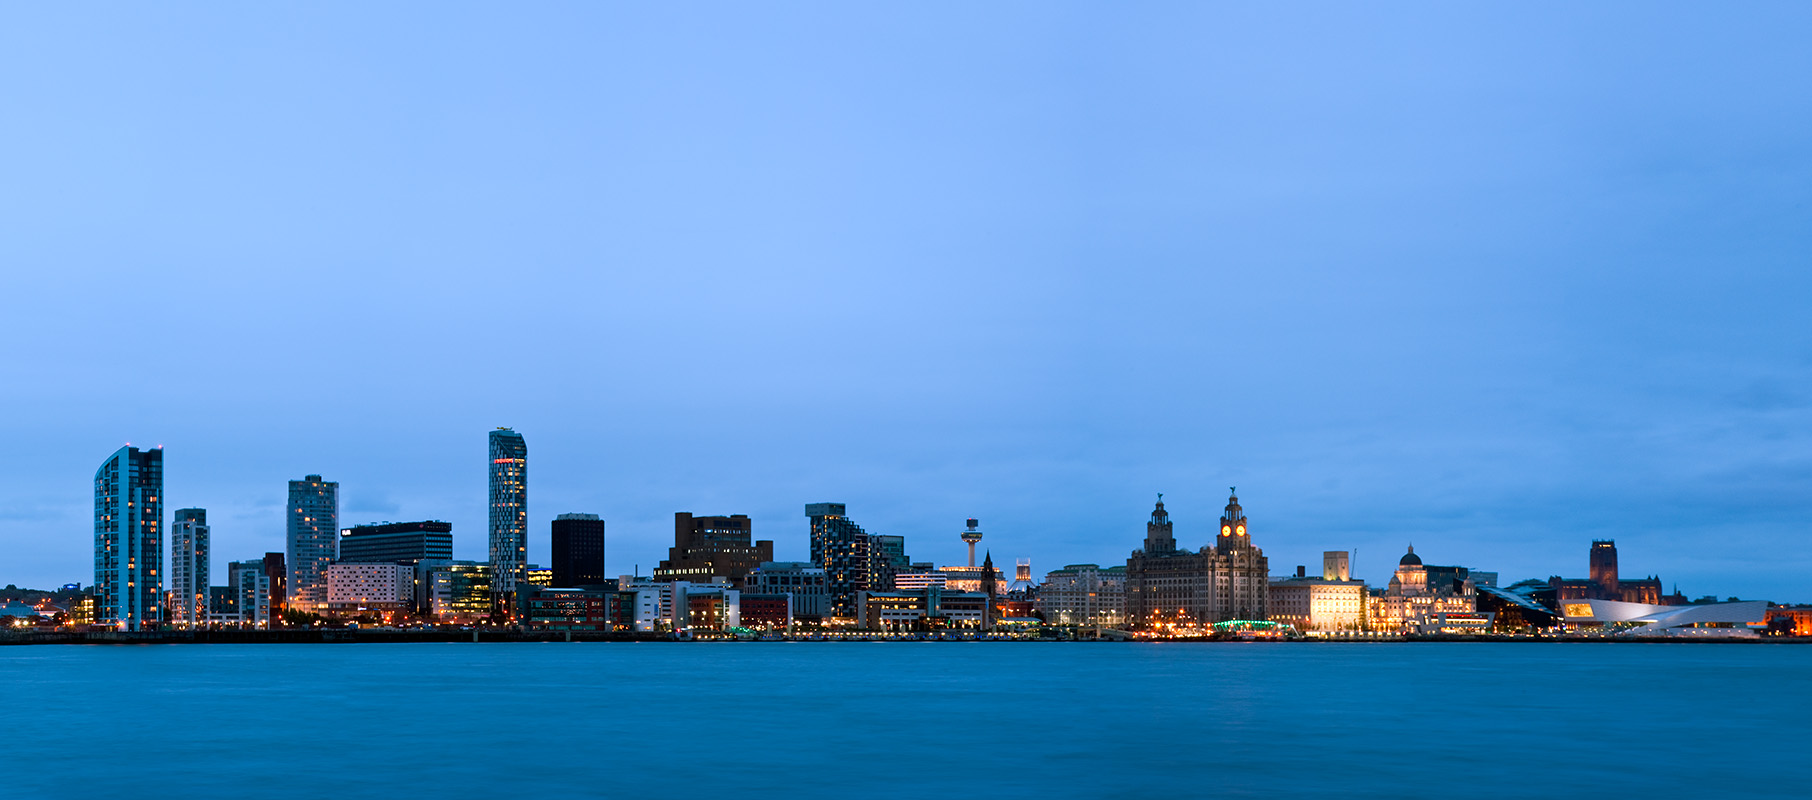 A panorama of Liverpool, Merseyside viewed from Wallasey, Wirral